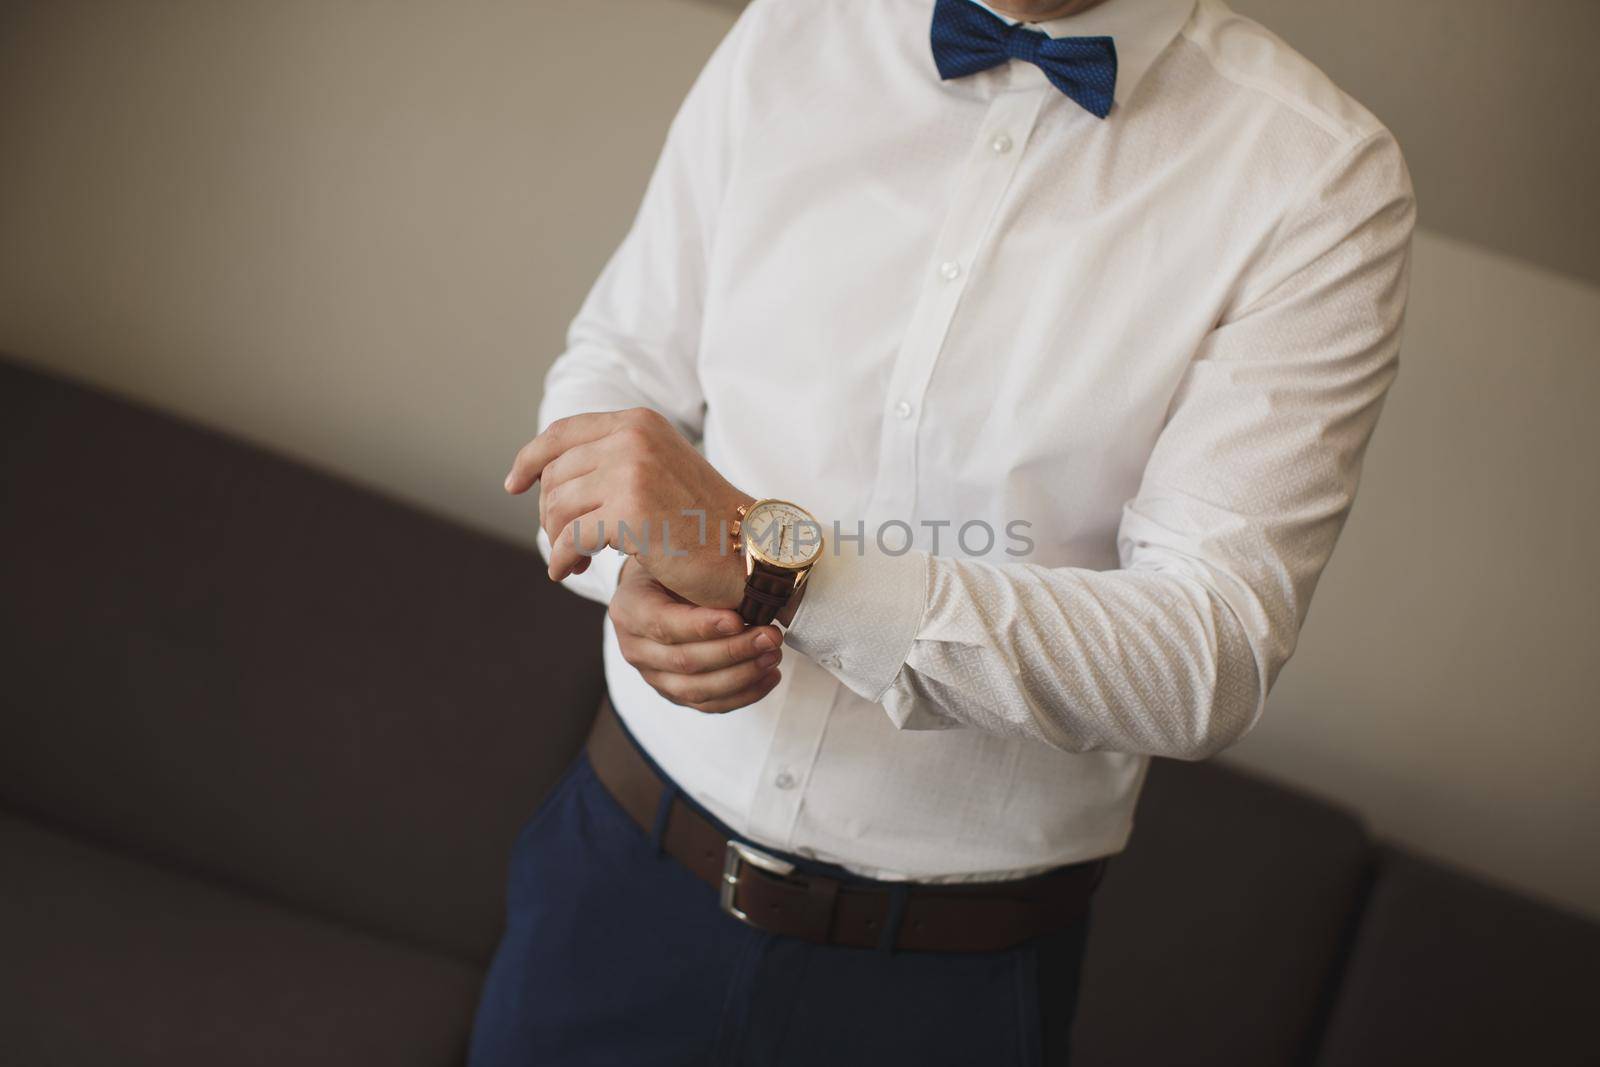 The groom's pack, who puts a watch on his hand.